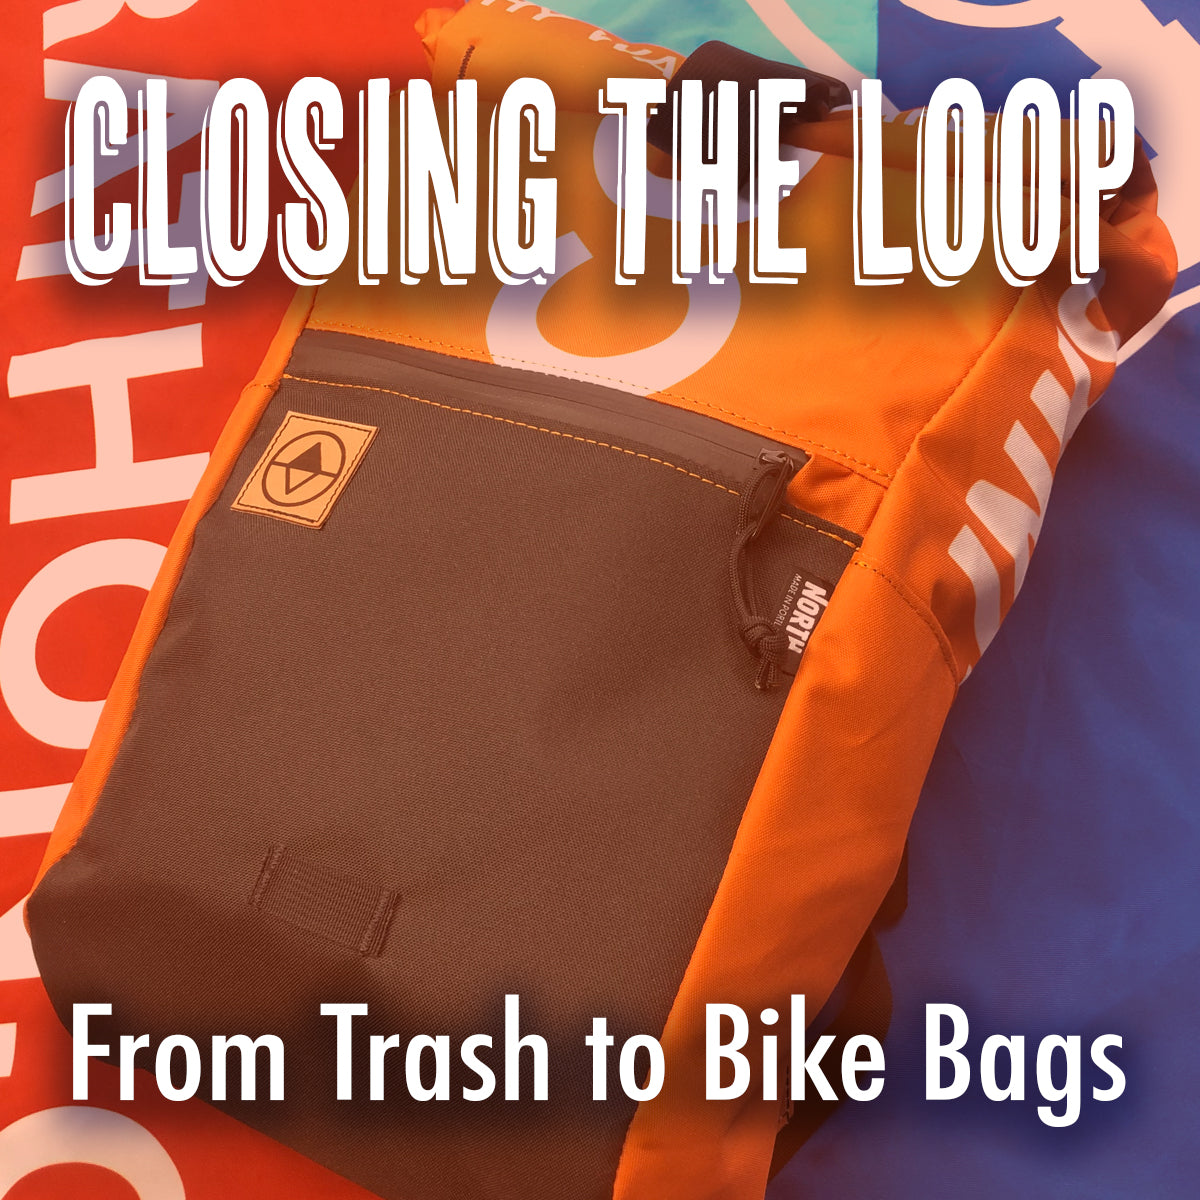 Closing the Loop: From Trash to Bike Bags